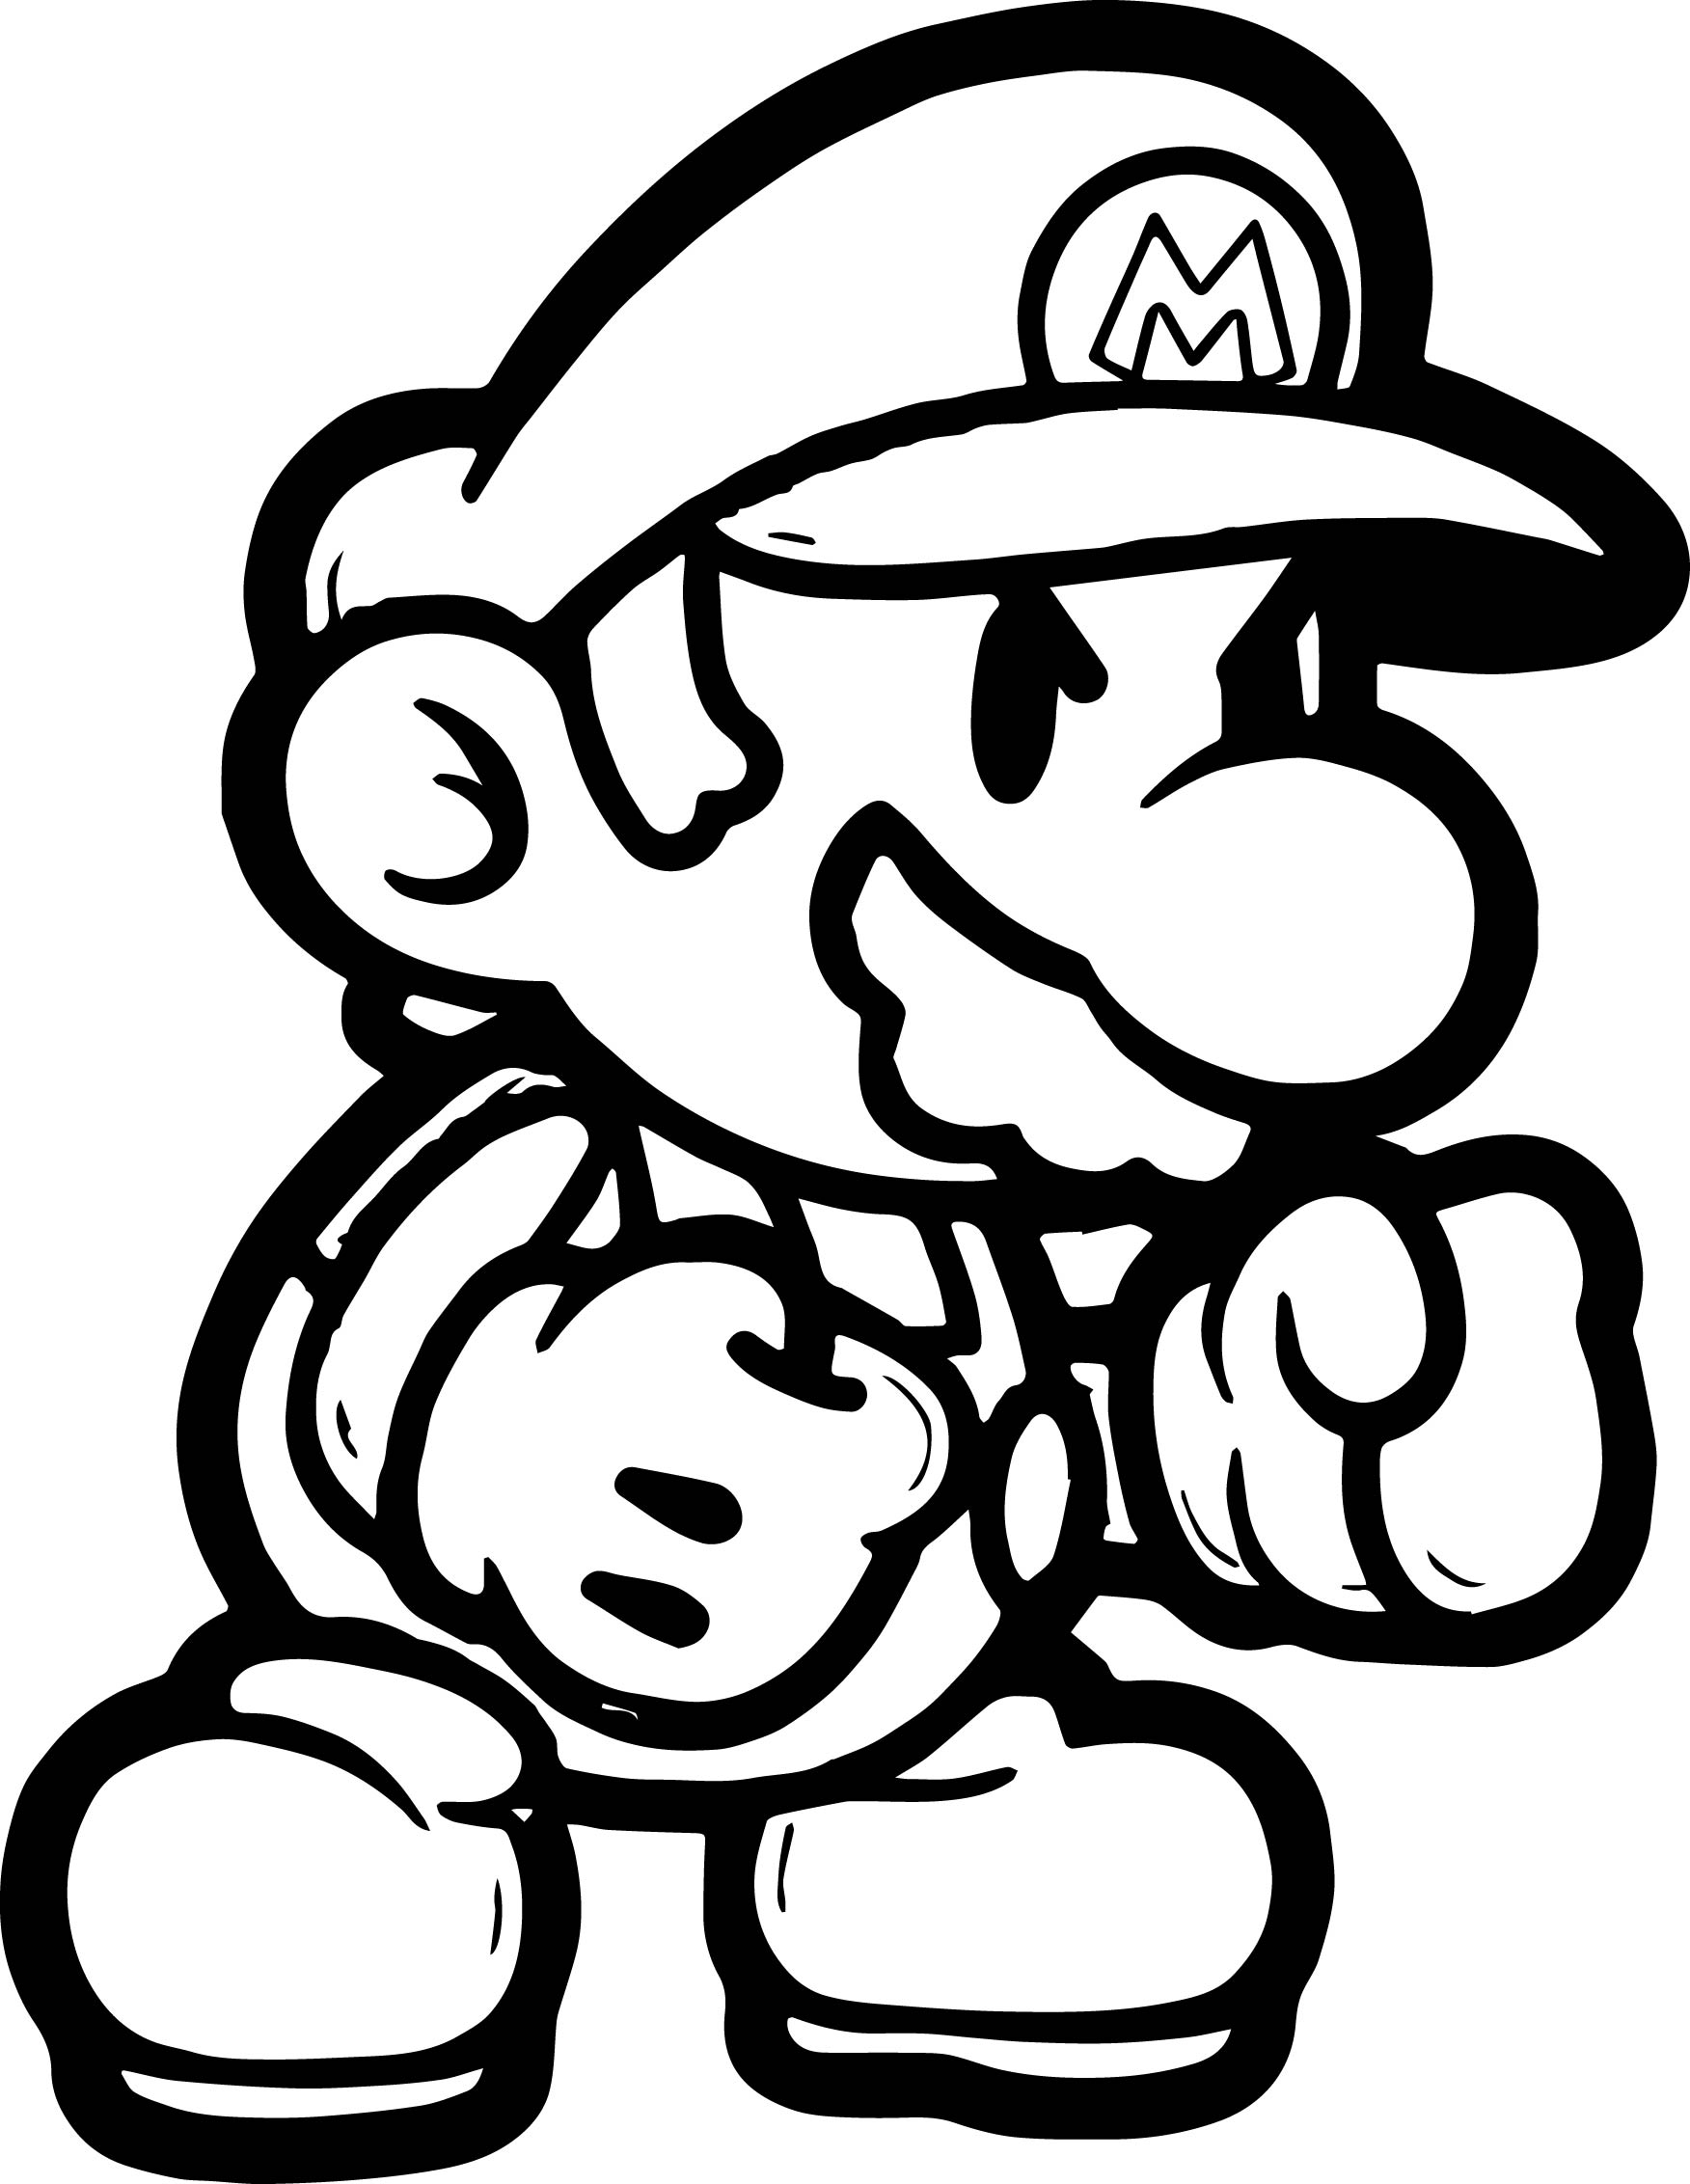 Mario Coloring Pages Printable - Customize and Print